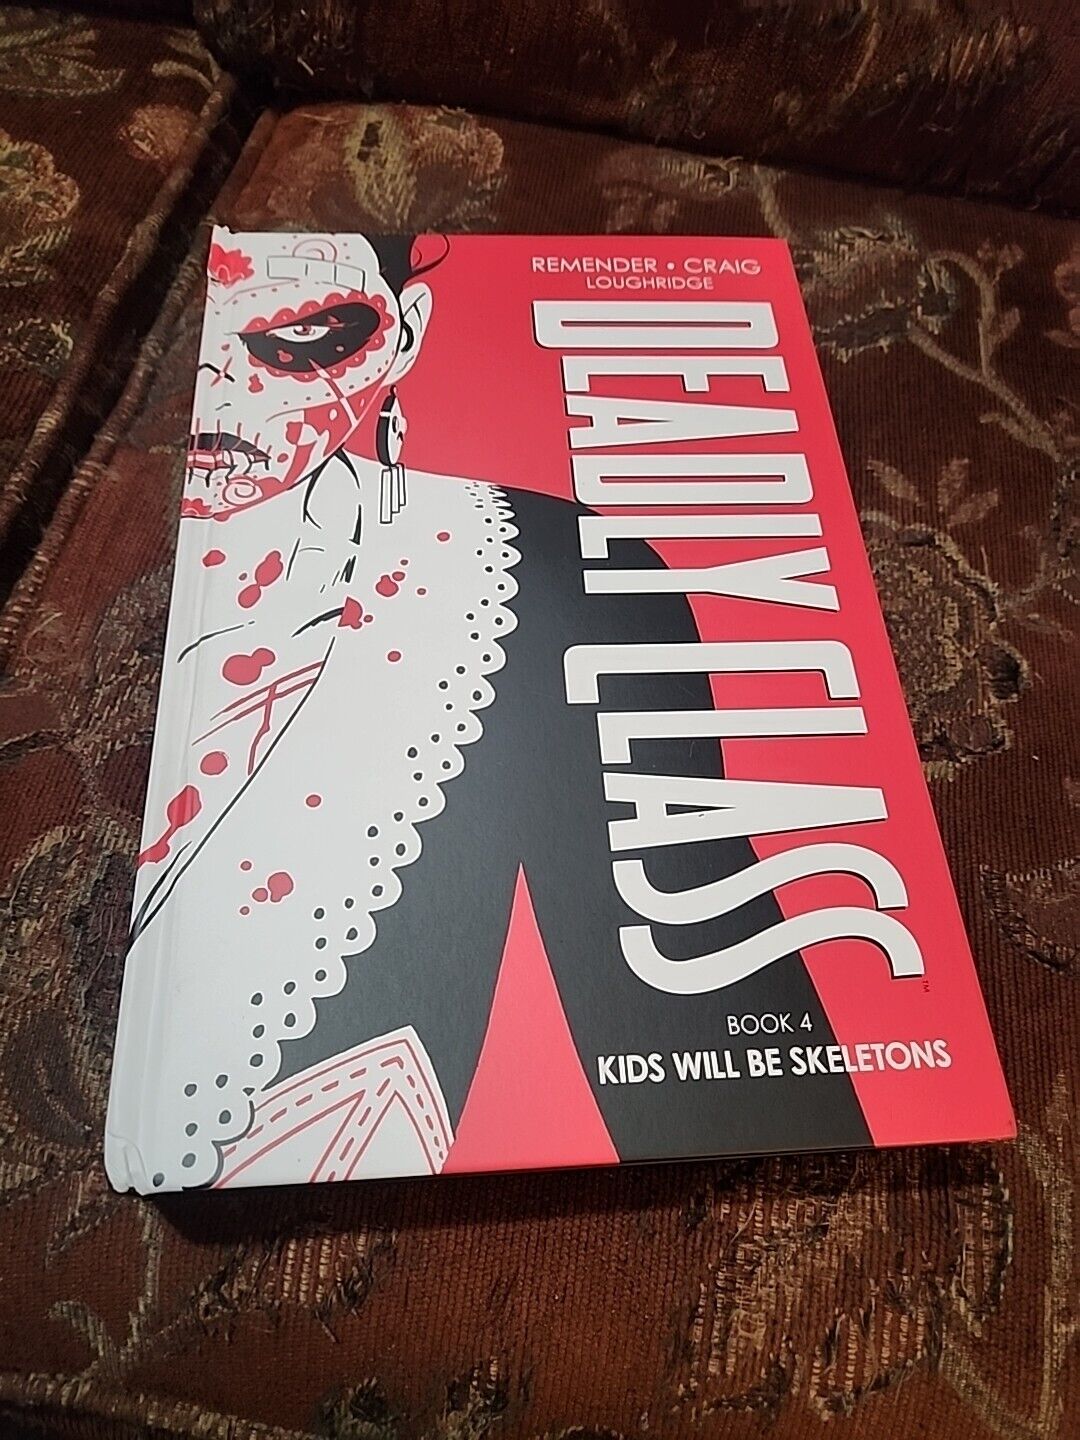 Deadly Class #4 (Image Comics) plus others (slightly damaged)